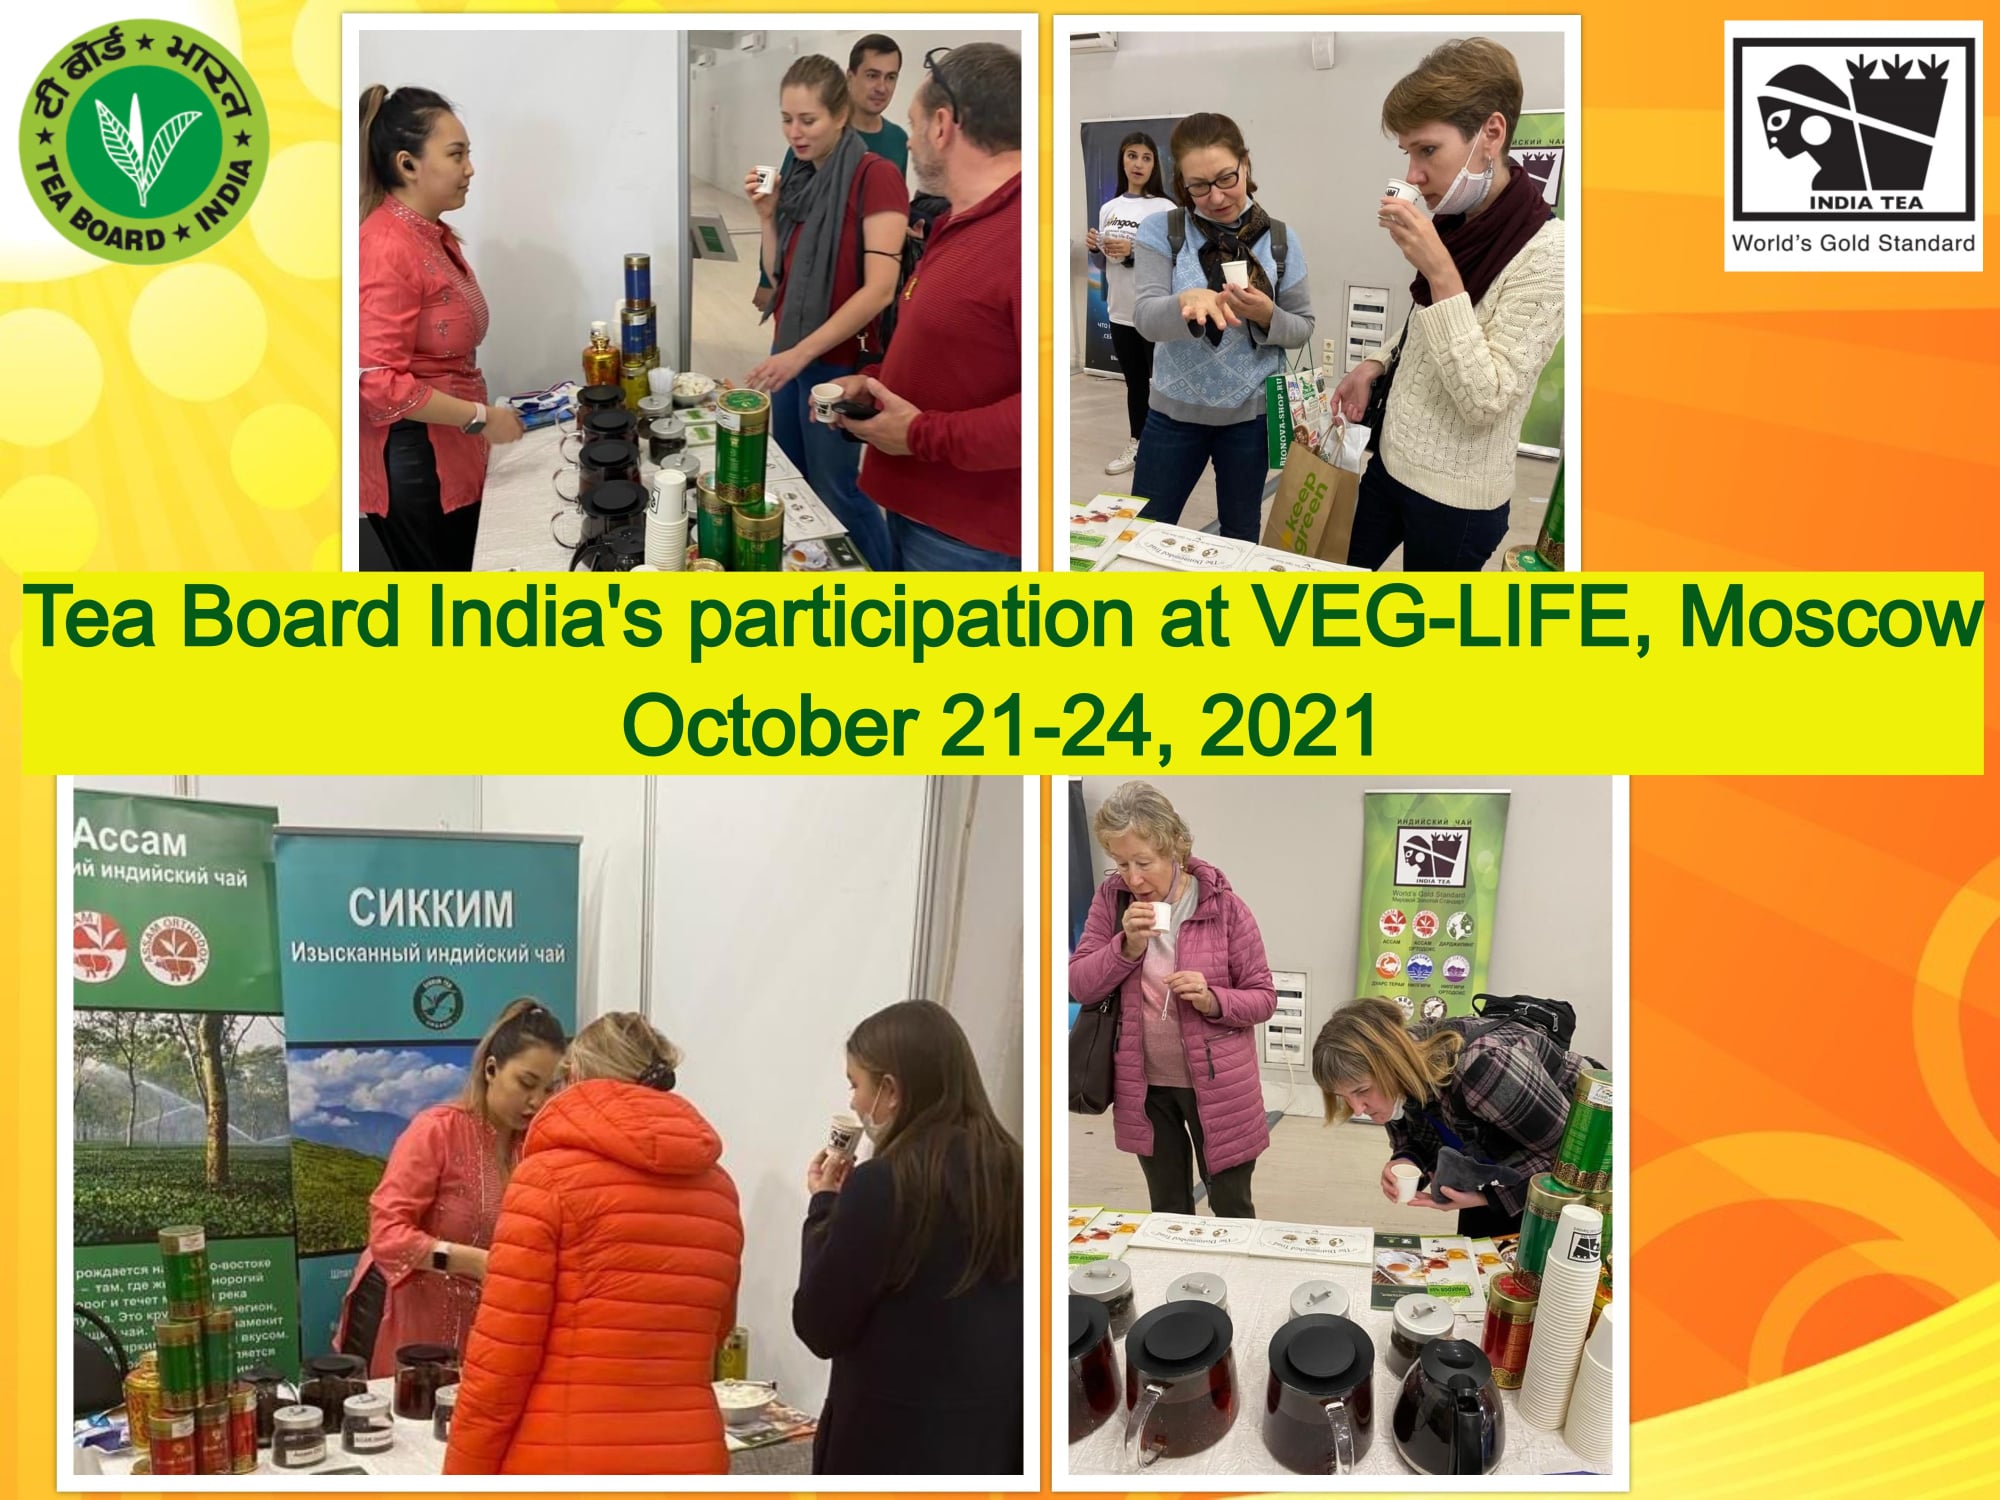 Tea Board India's participation at VEG-LIFE, Moscow, October 21-24-2021